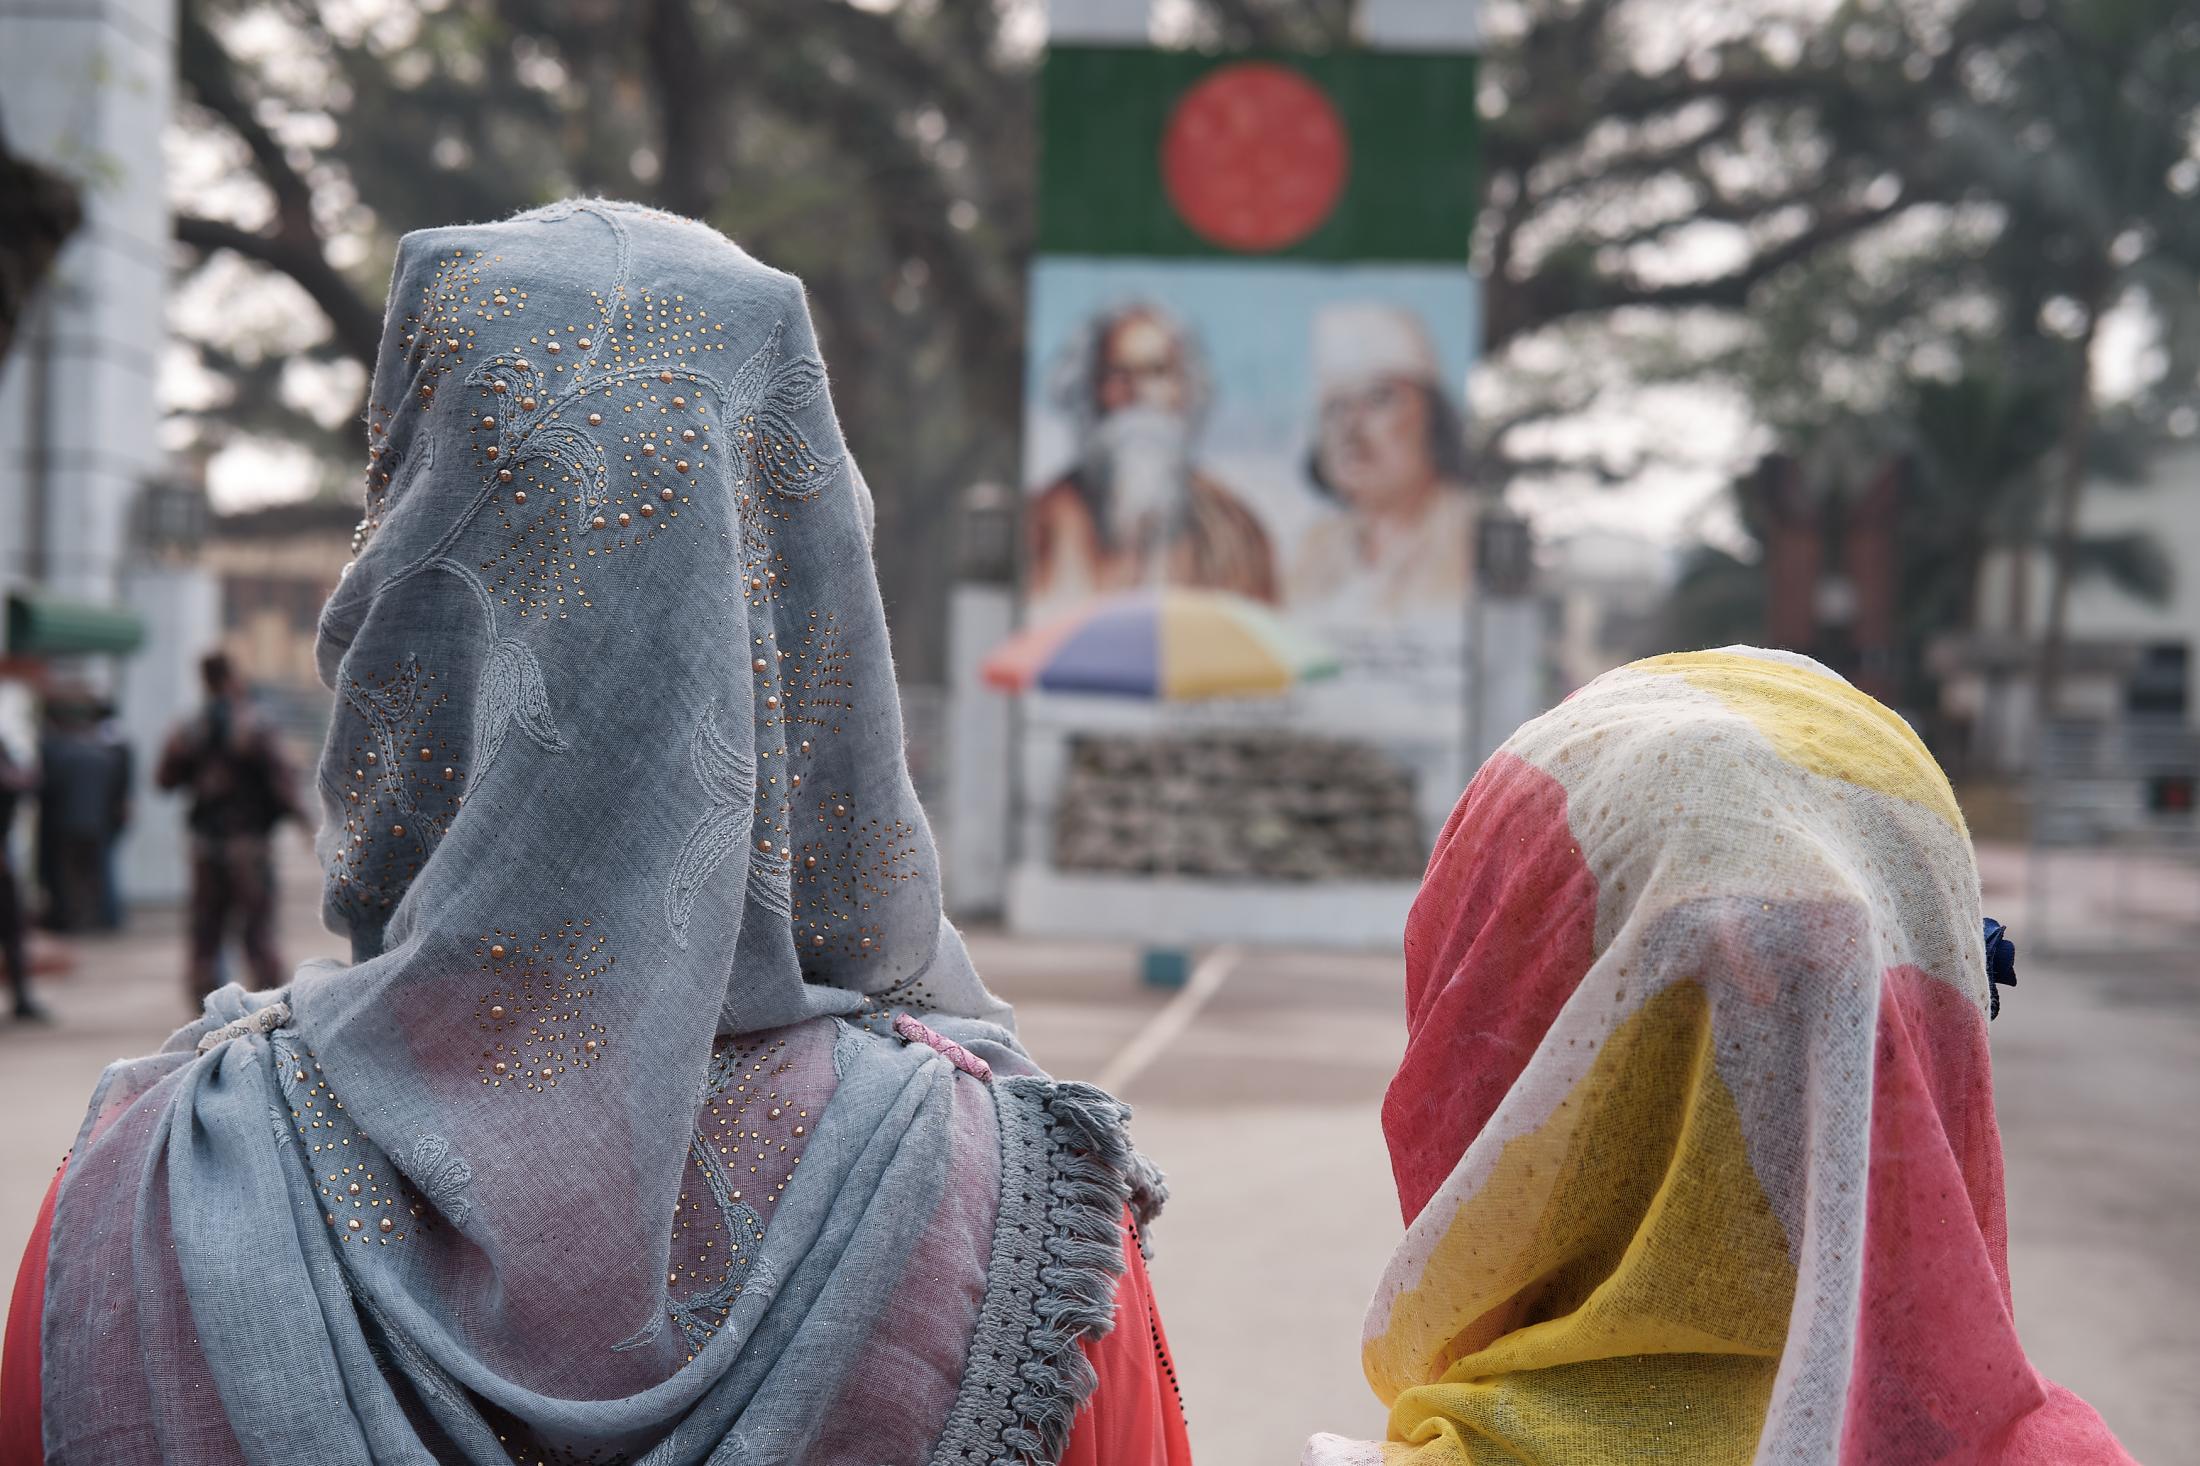 In Search of Intimacy - At the India-Bangladesh border at Benapole, two women...